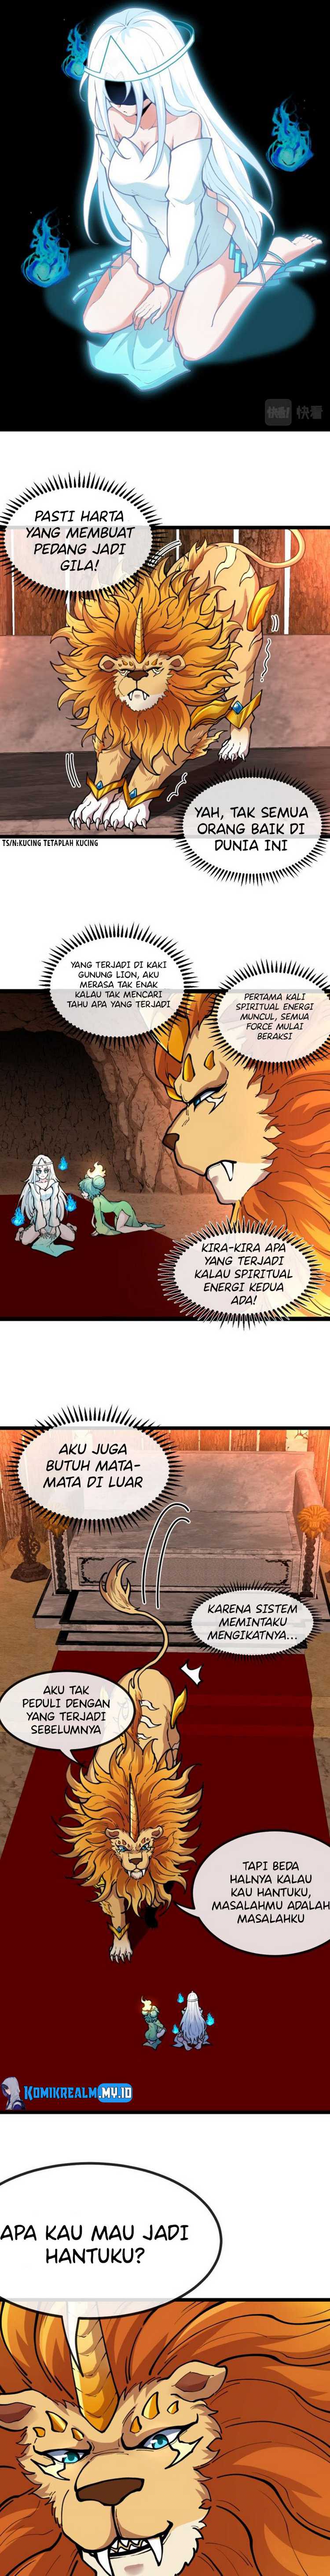 The Golden Lion King  Chapter 02 18